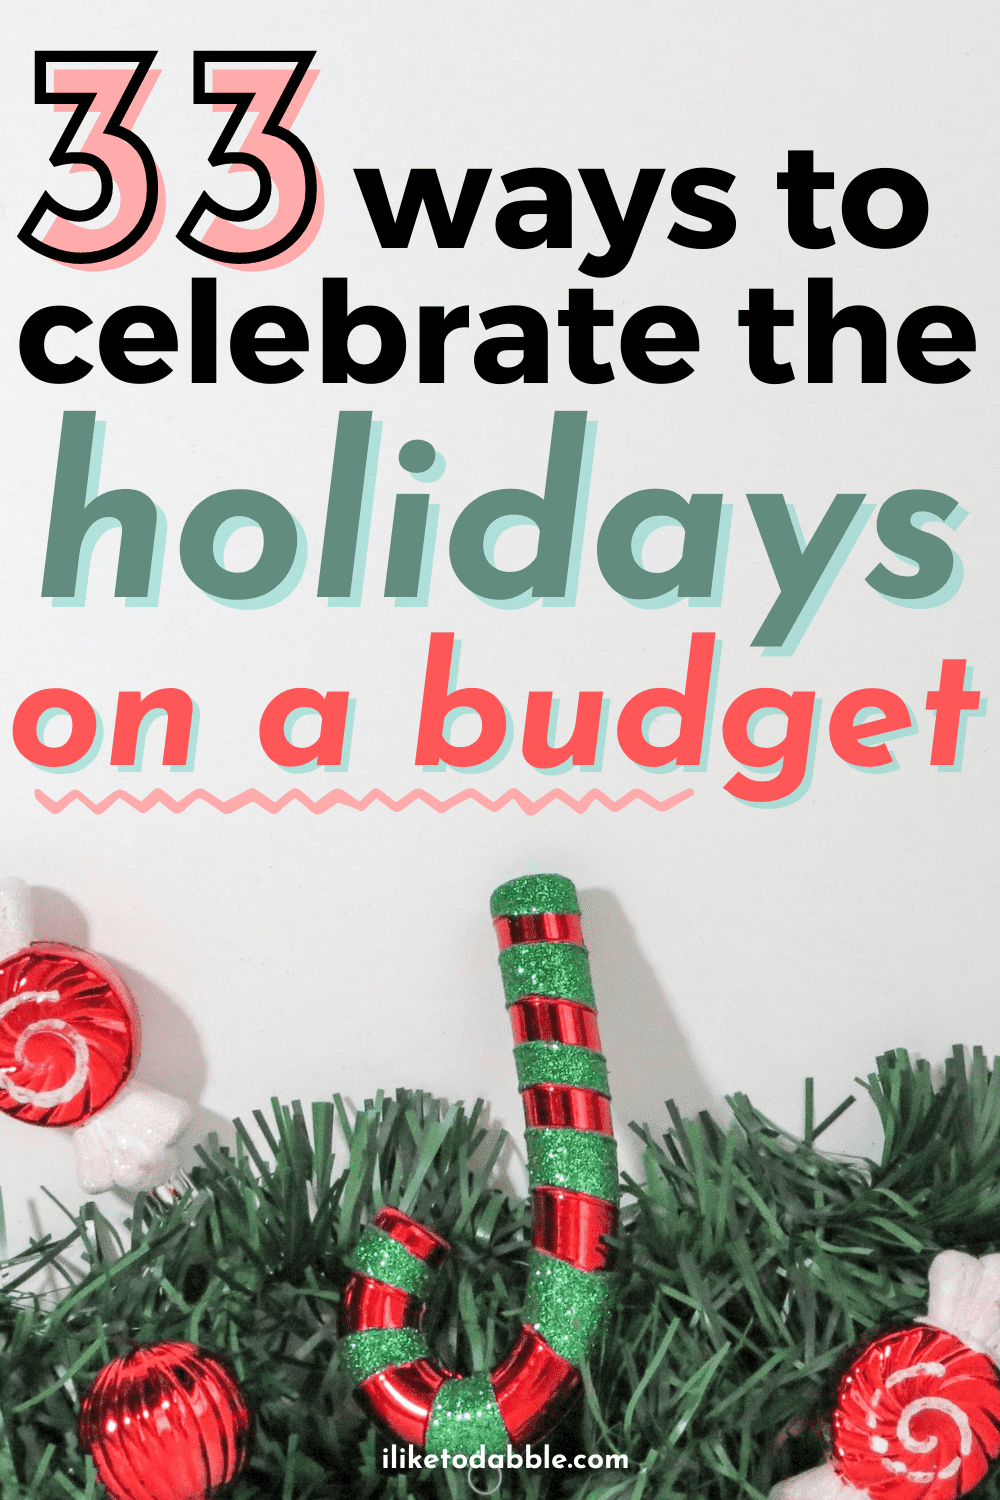 Christmas decorations on a table with text that reads: 33 ways to celebrate the holidays on a budget